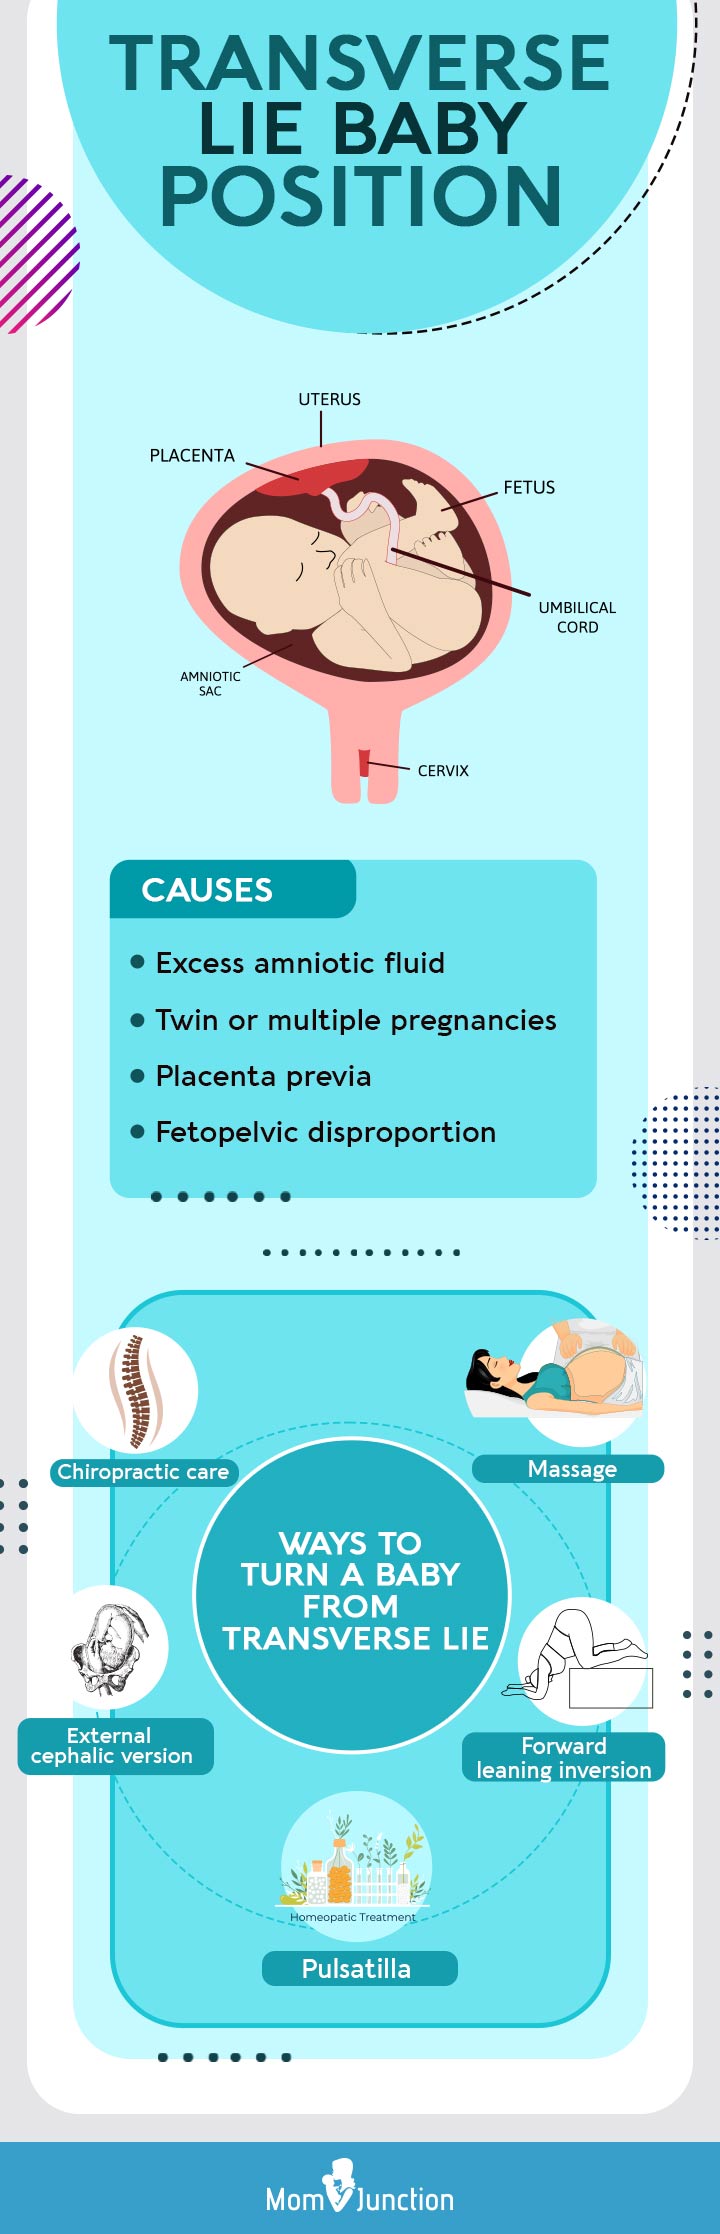 ways to turn a baby from transverse lie (Infographic)